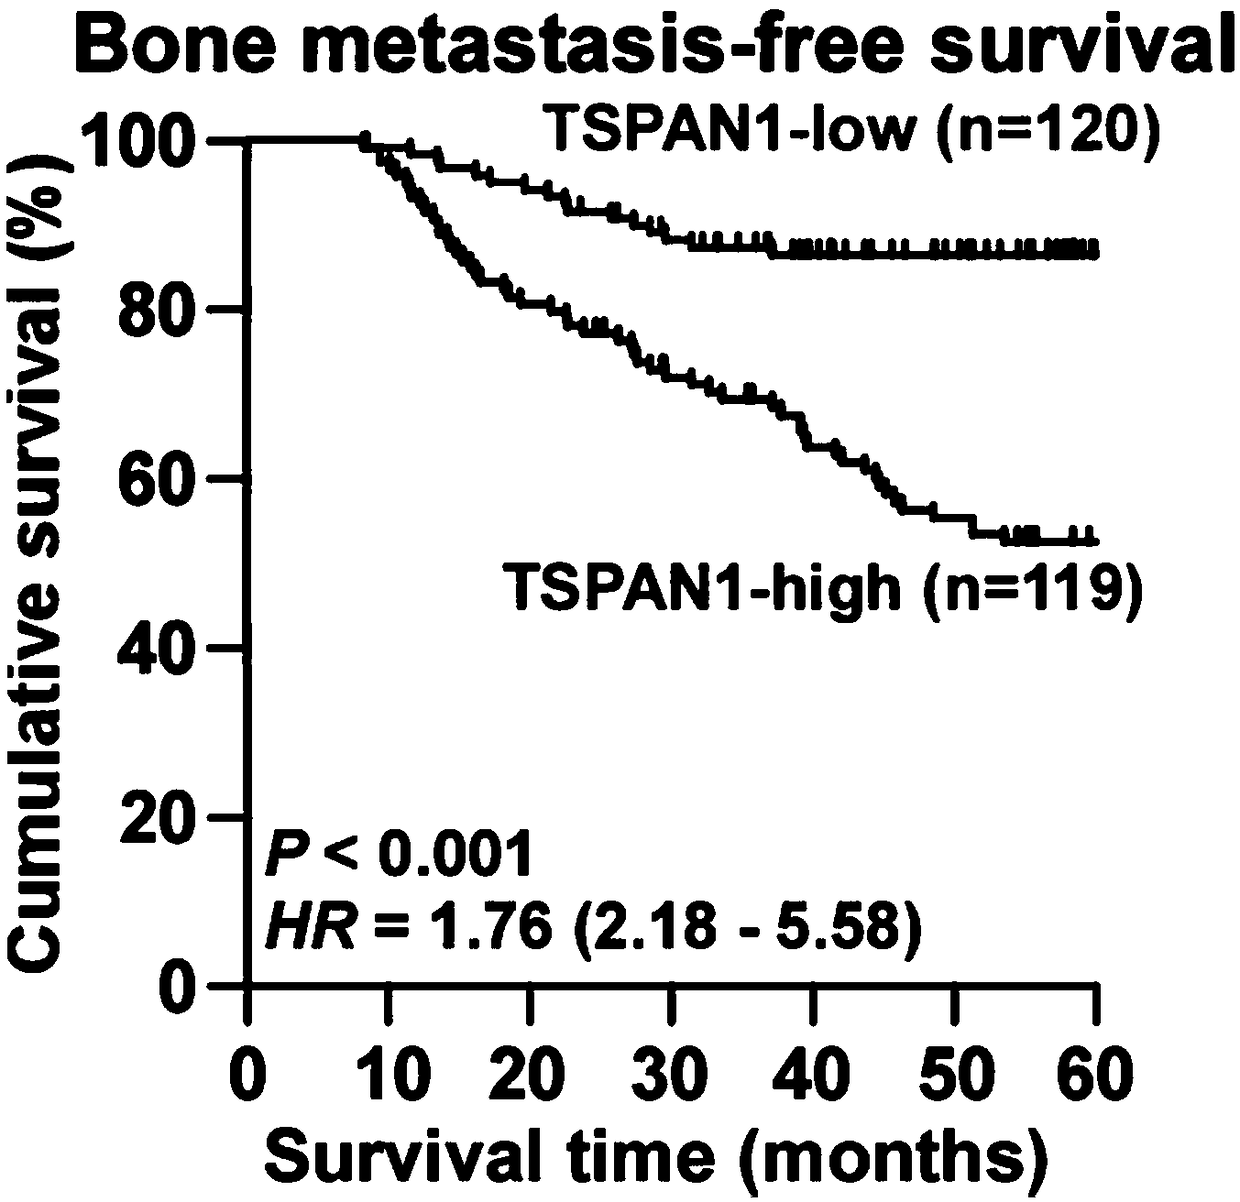 Application of TSPAN1 in diagnosis, prognosis and treatment of breast cancer metastasis